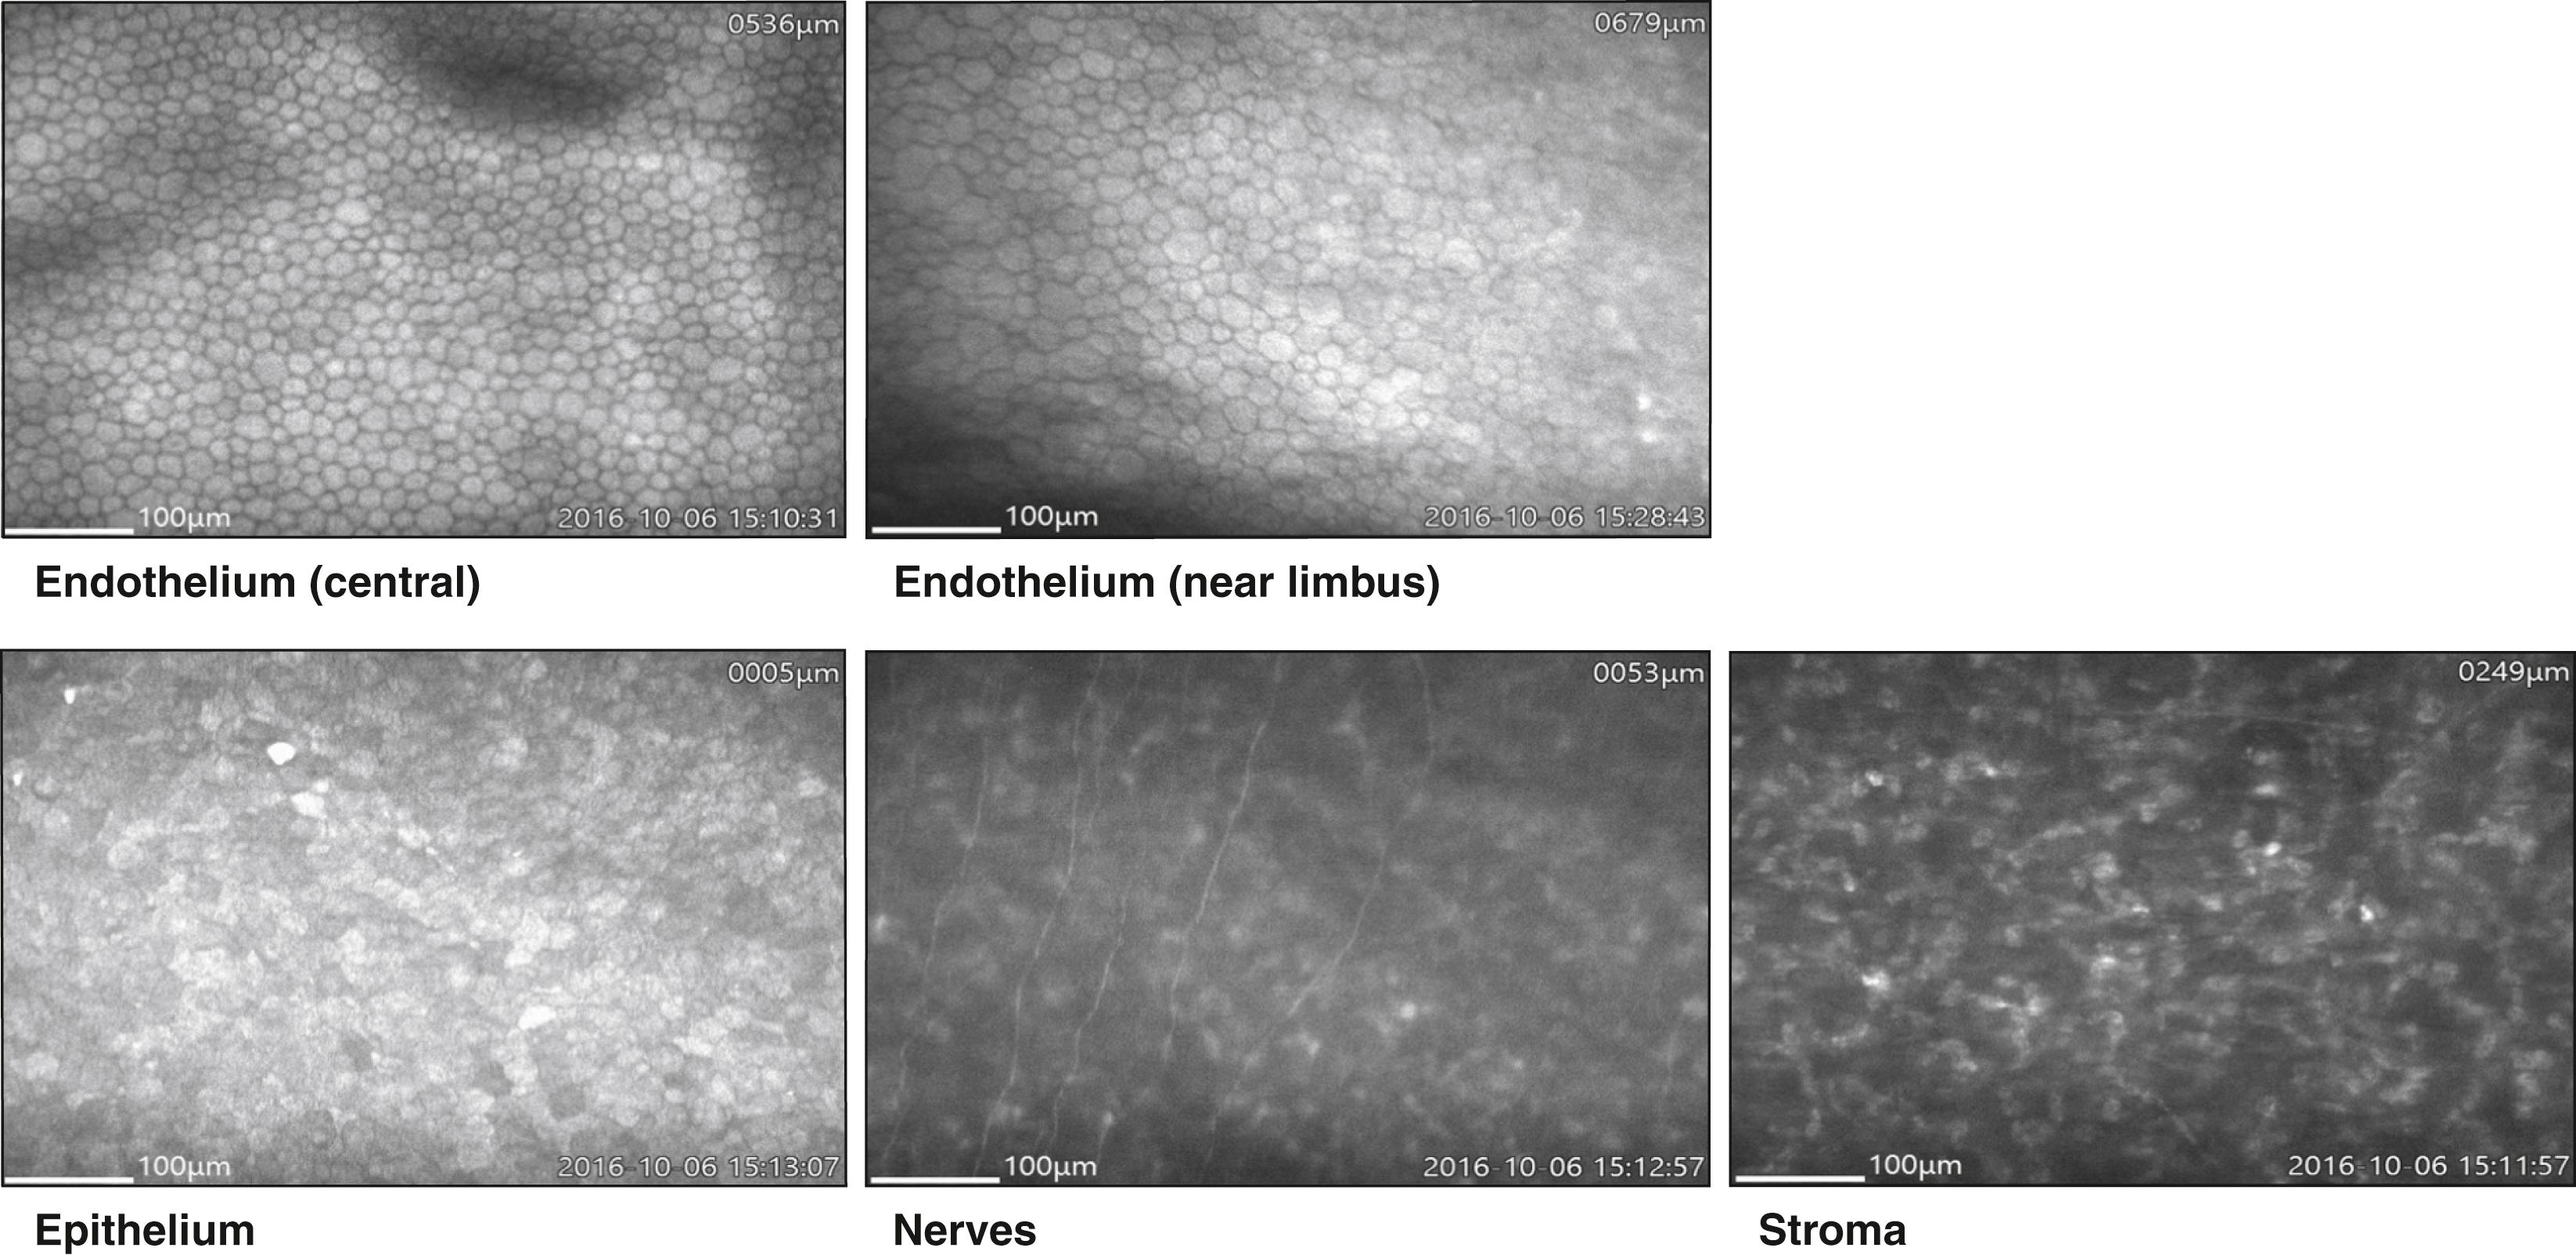 Fig. 13.4, Wide-field images of normal central and near limbus endothelium, epithelium, nerves, and stroma acquired with the Konan Cell Chek C.